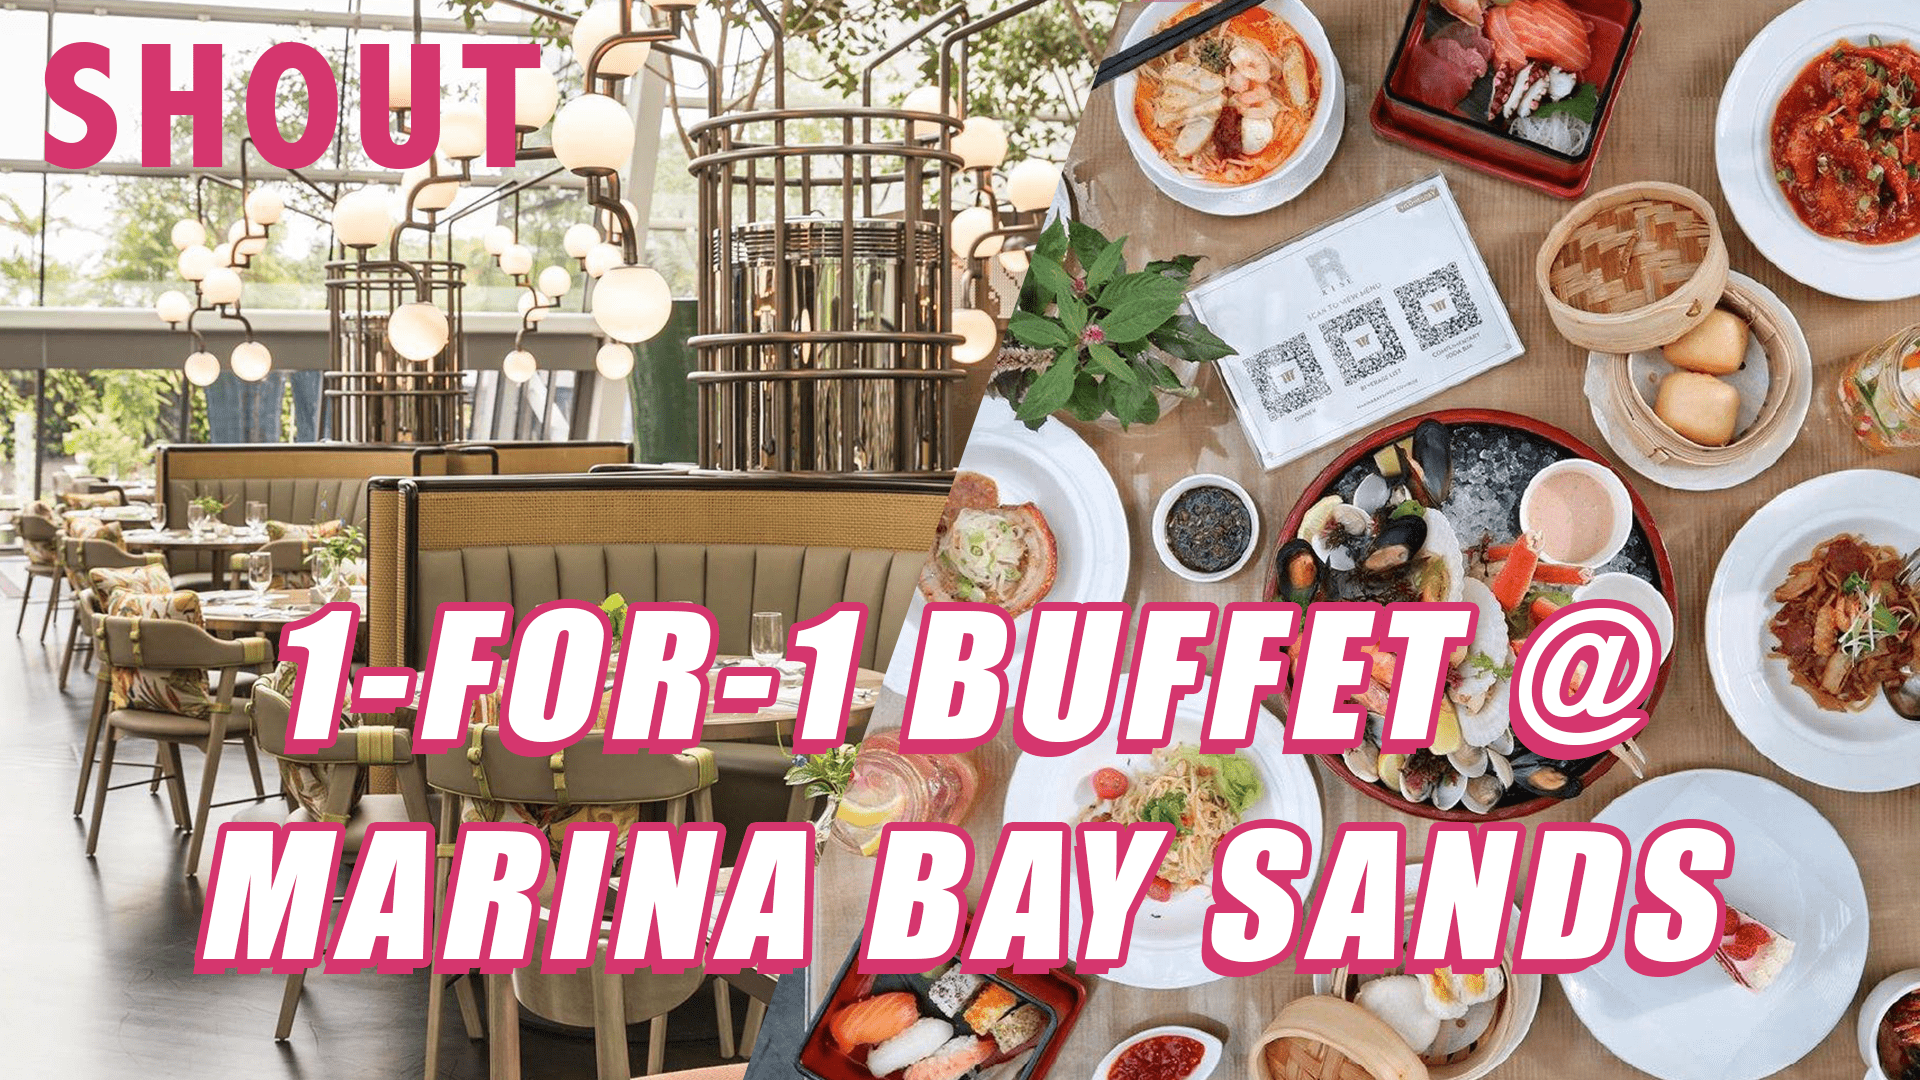 1-FOR-1 Lunch & Dinner Buffet @ RISE Marina Bay Sands! – Shout